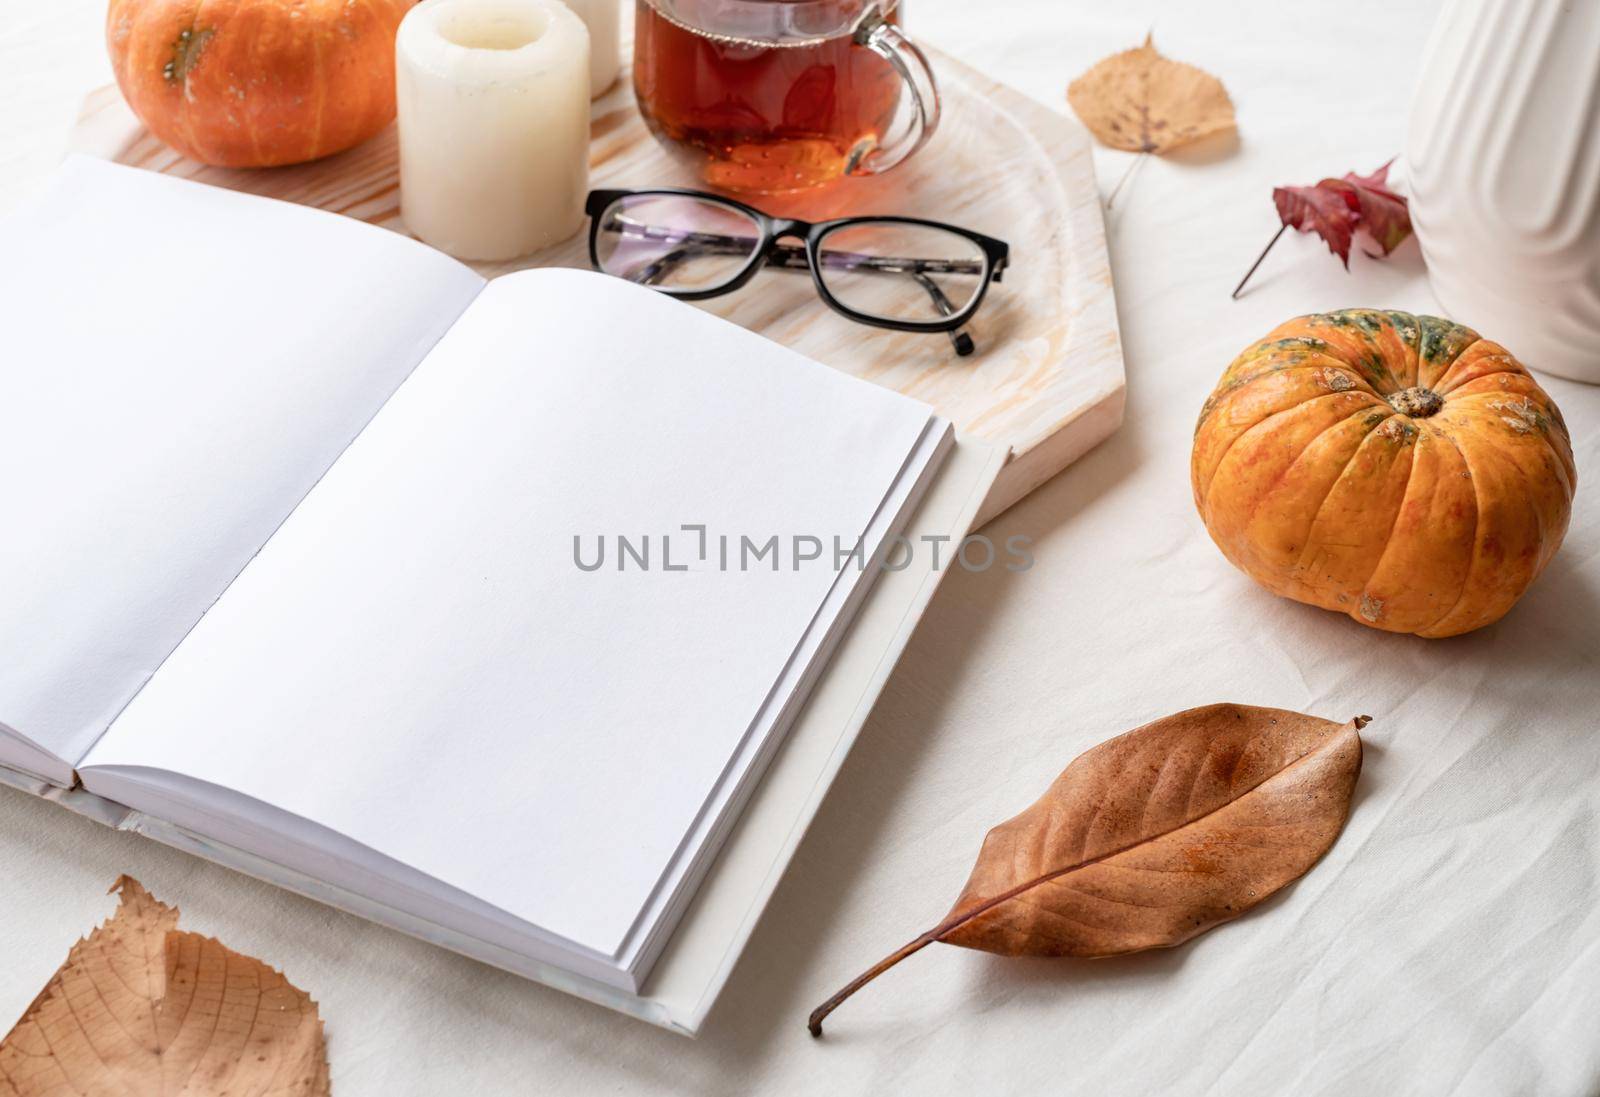 Back to school. Cozy autumn. white blank book with autumn leaves, glasses and candles on white table , mockup design